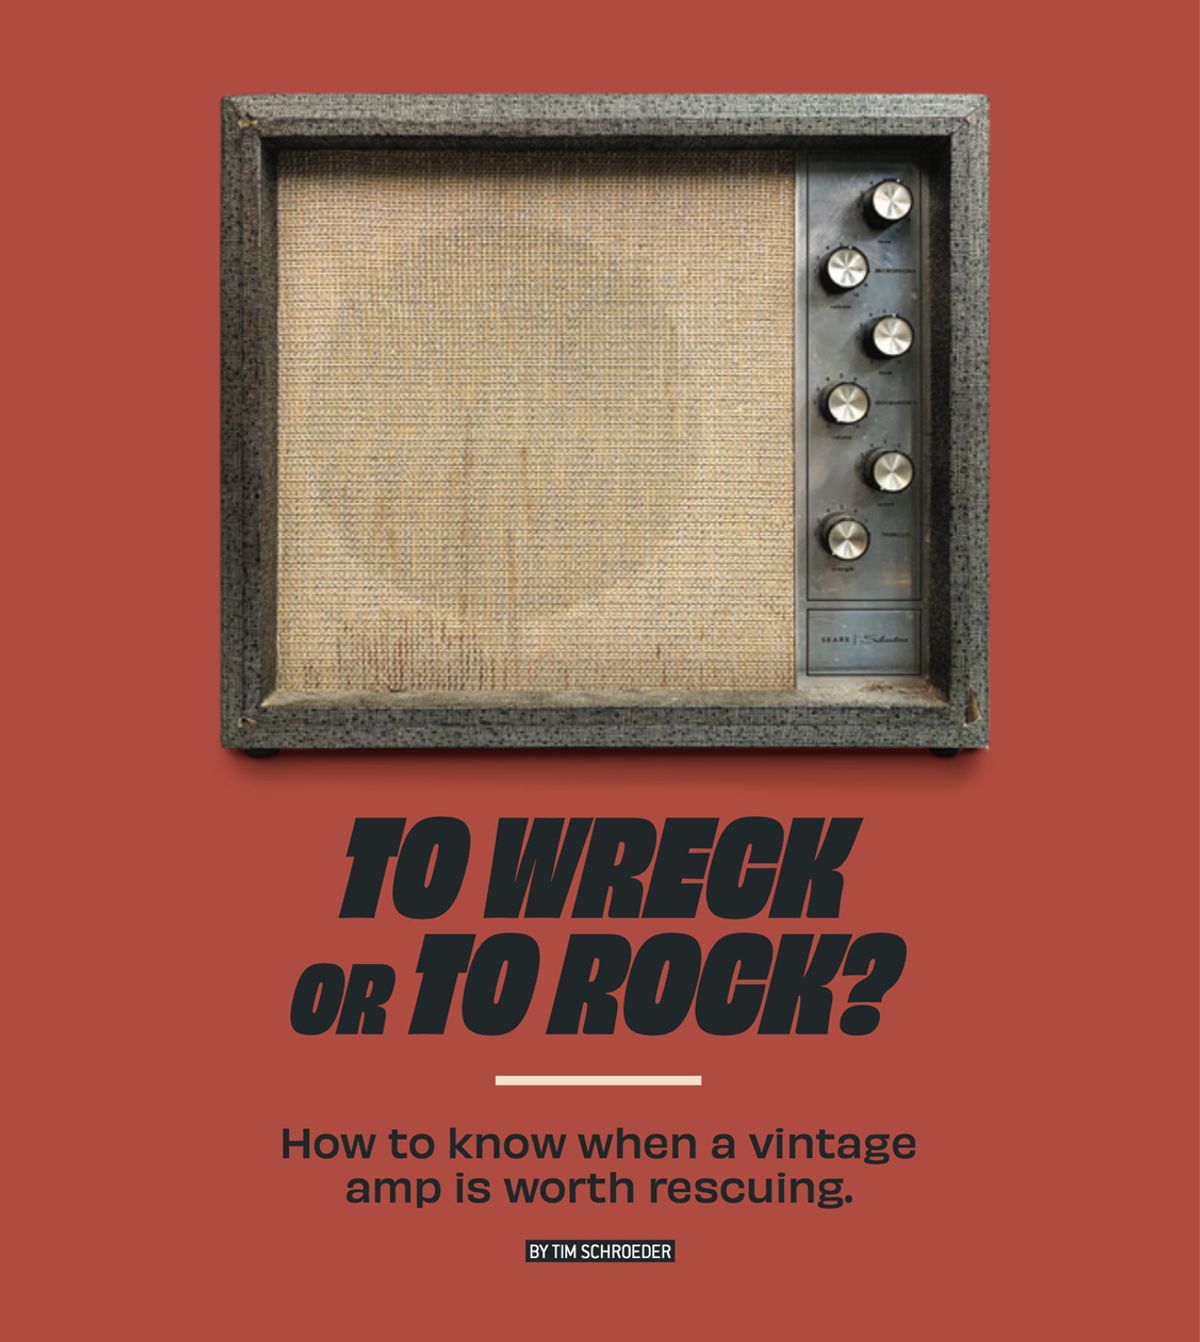 To Wreck or to Rock?